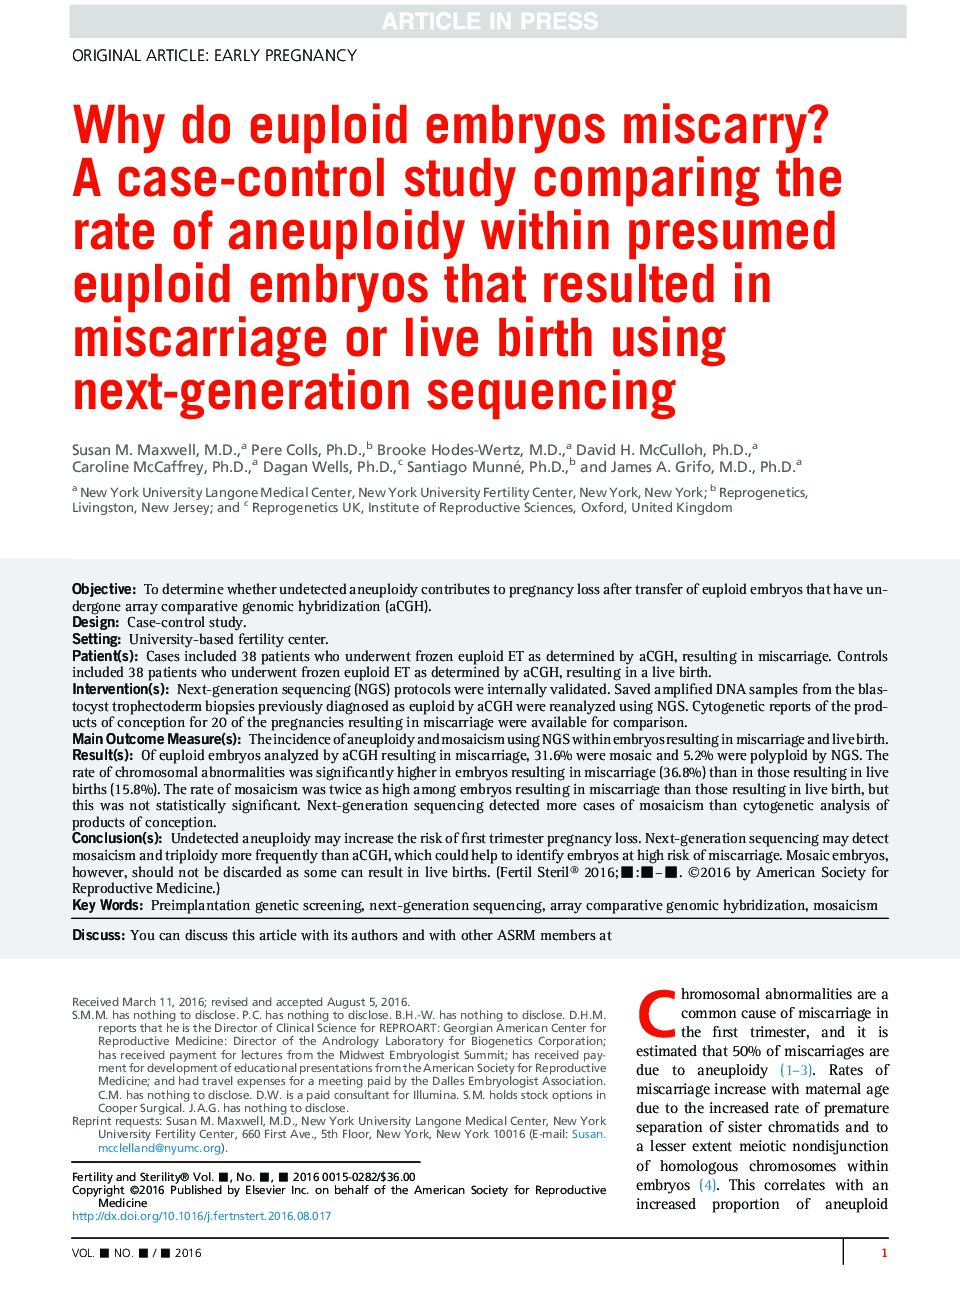 Why do euploid embryos miscarry? A case-control study comparing the rate of aneuploidy within presumed euploid embryos that resulted in miscarriage or live birth using next-generation sequencing